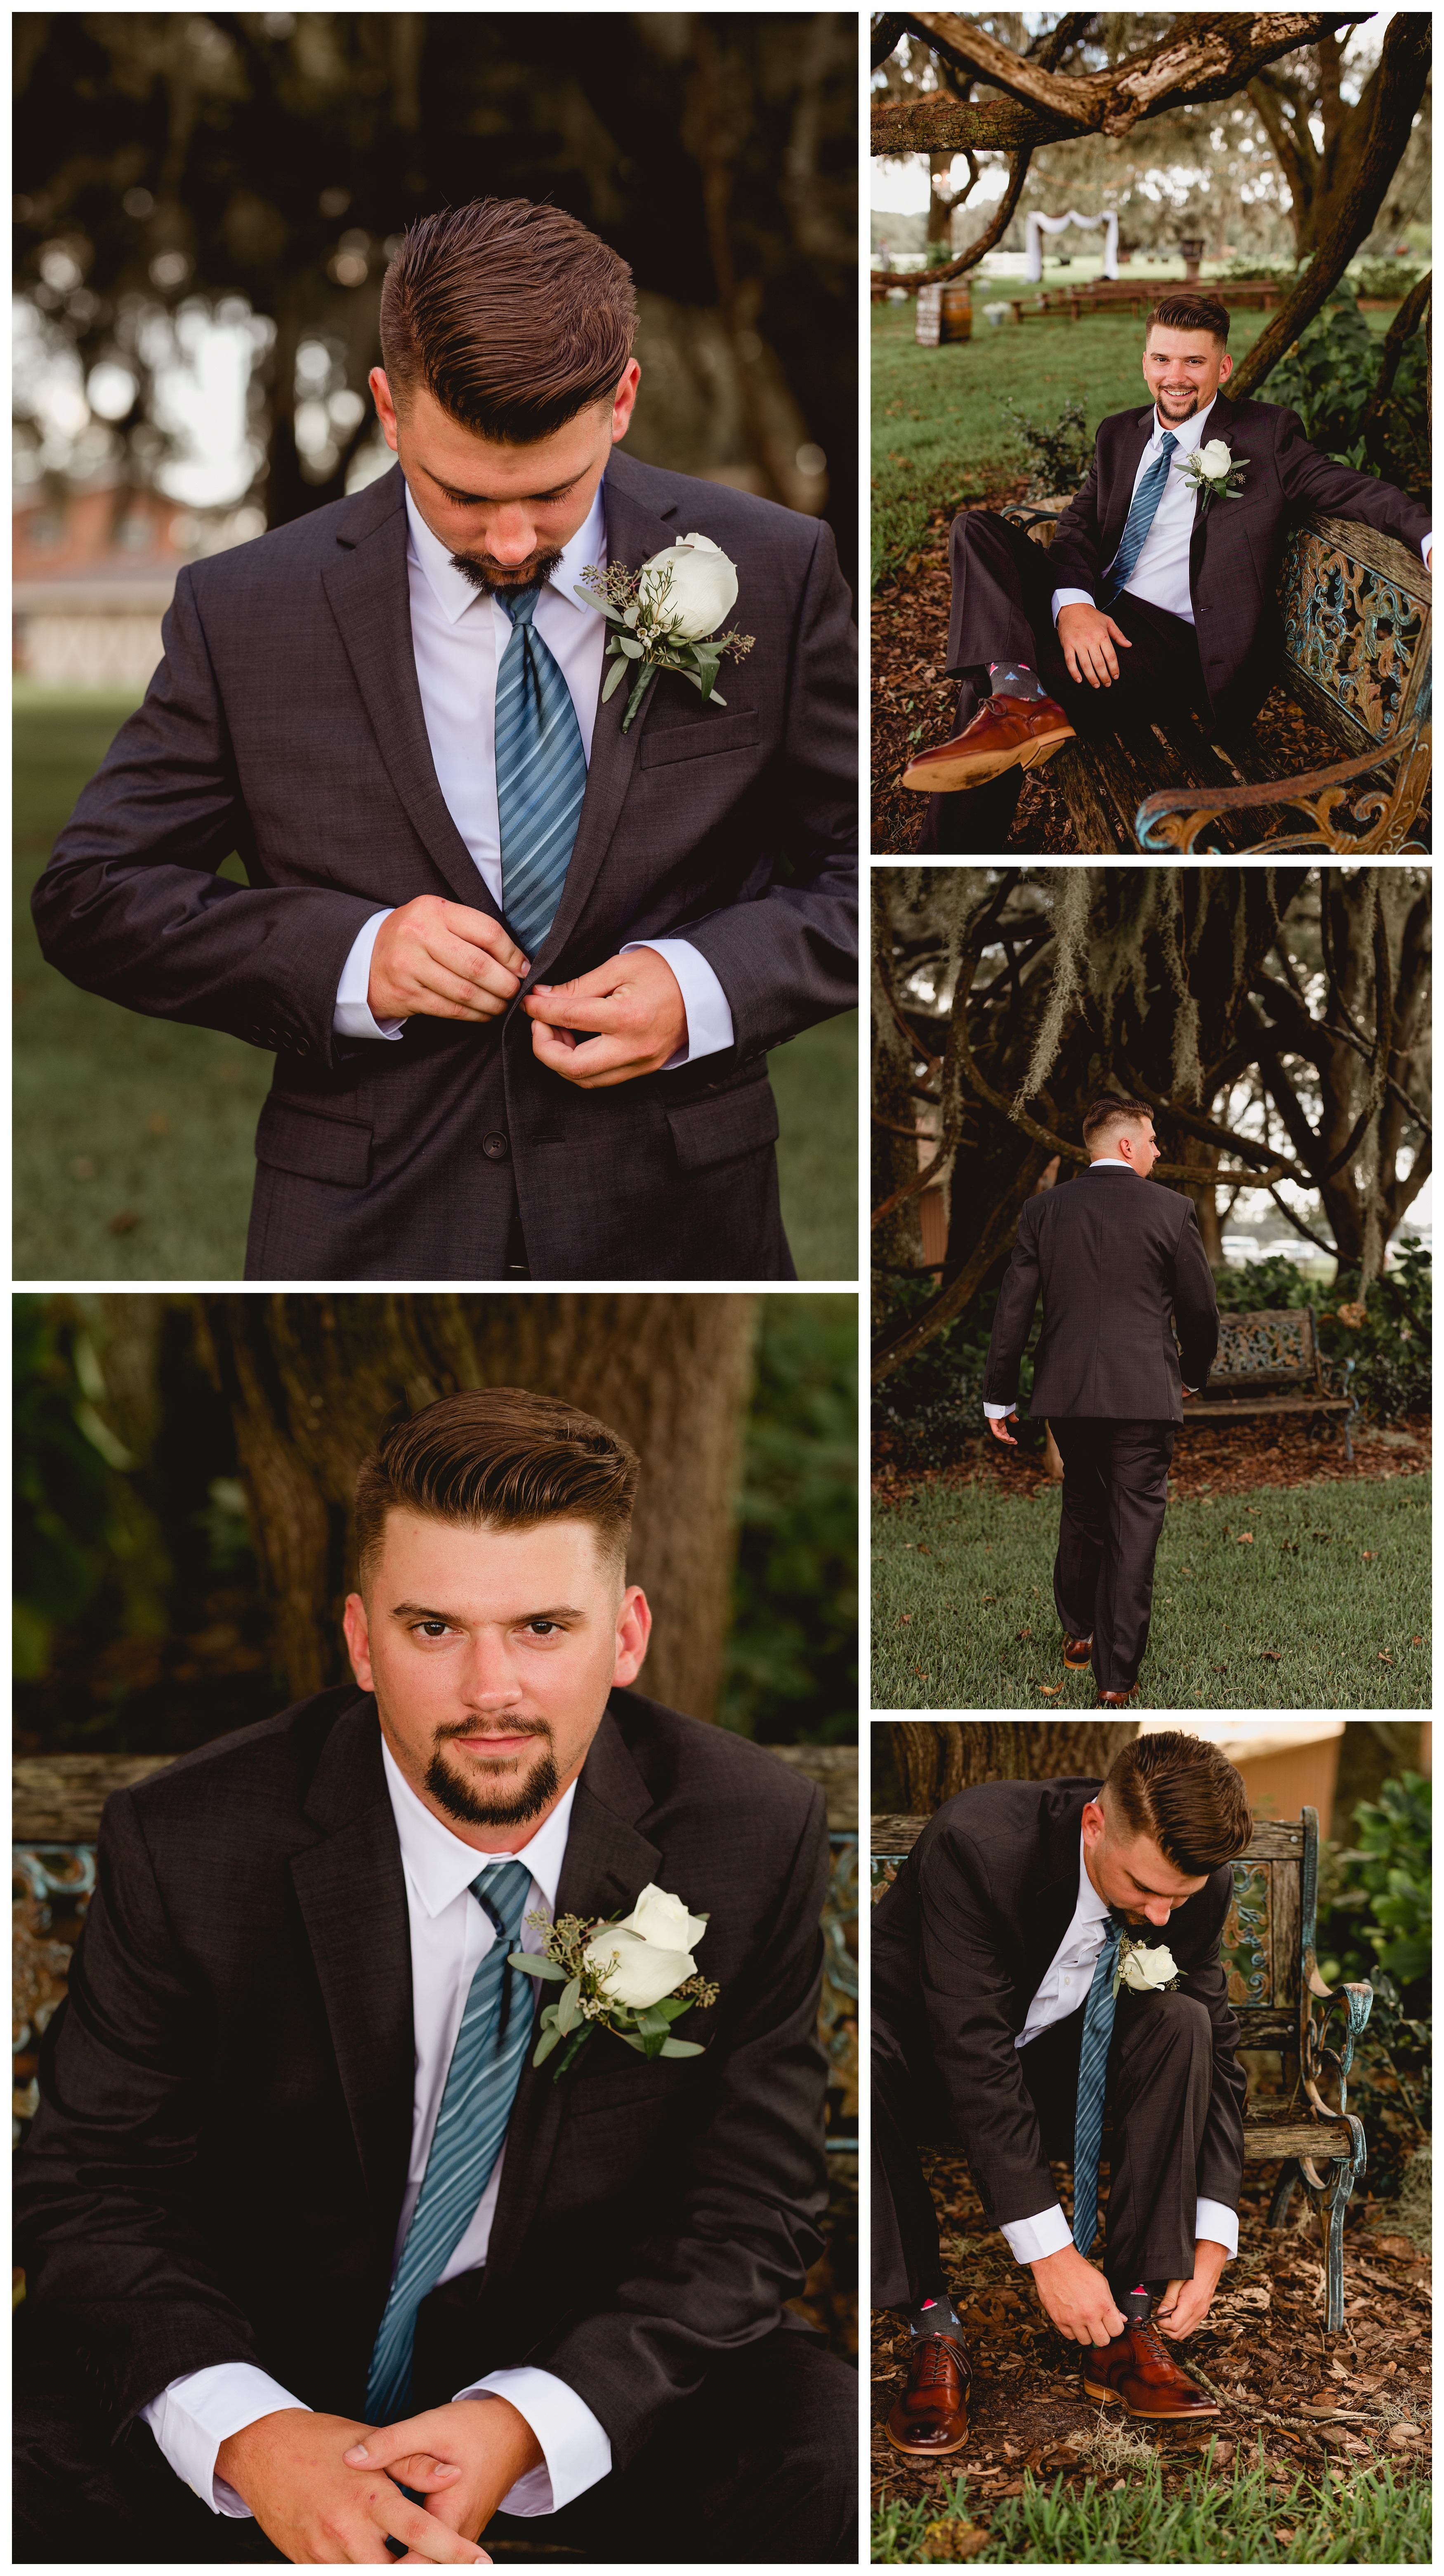 Groom portraits in Gainesville, Fl, wedding photographer located in north florida. Shelly Williams Photography